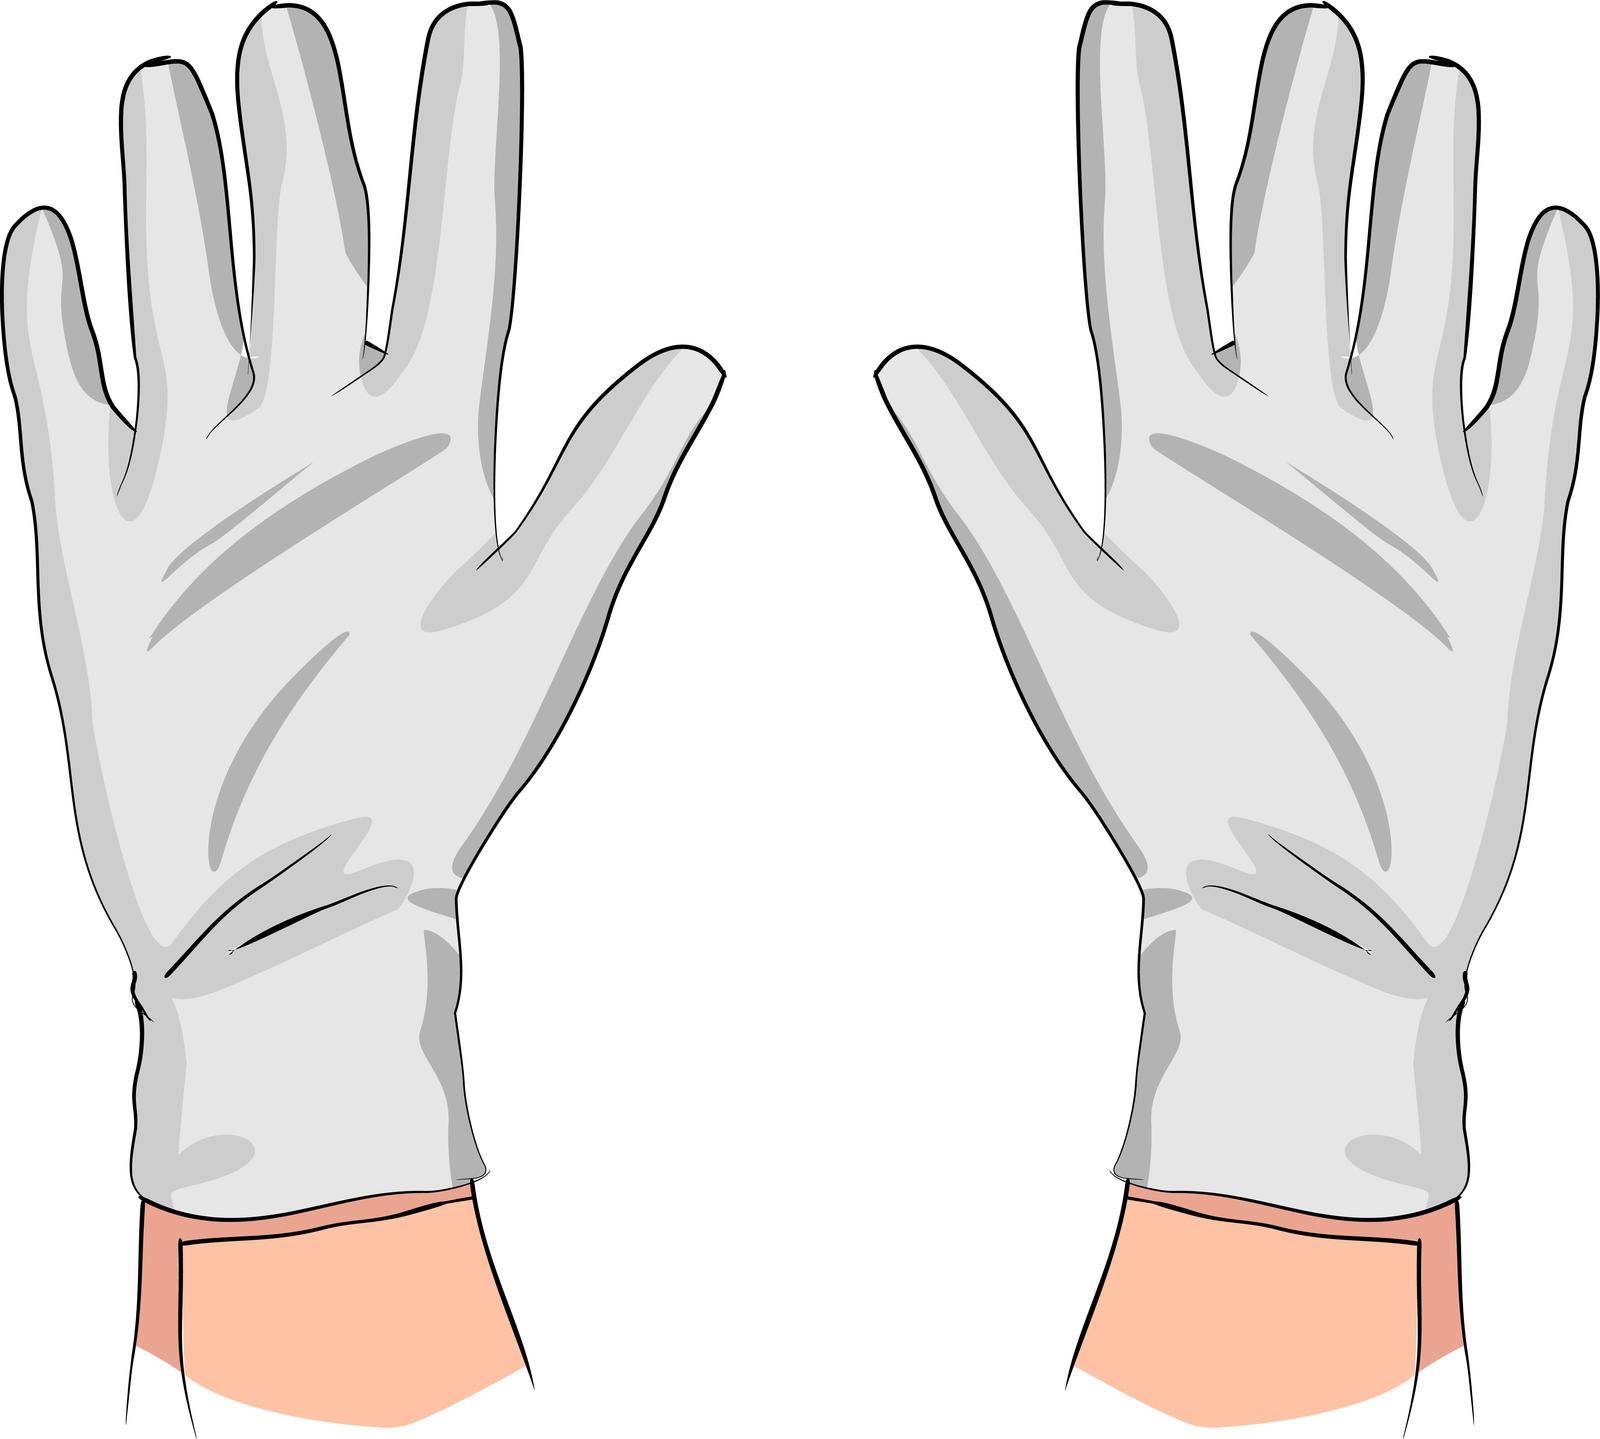 Medical gloves on the hands of a doctor. by Verrone